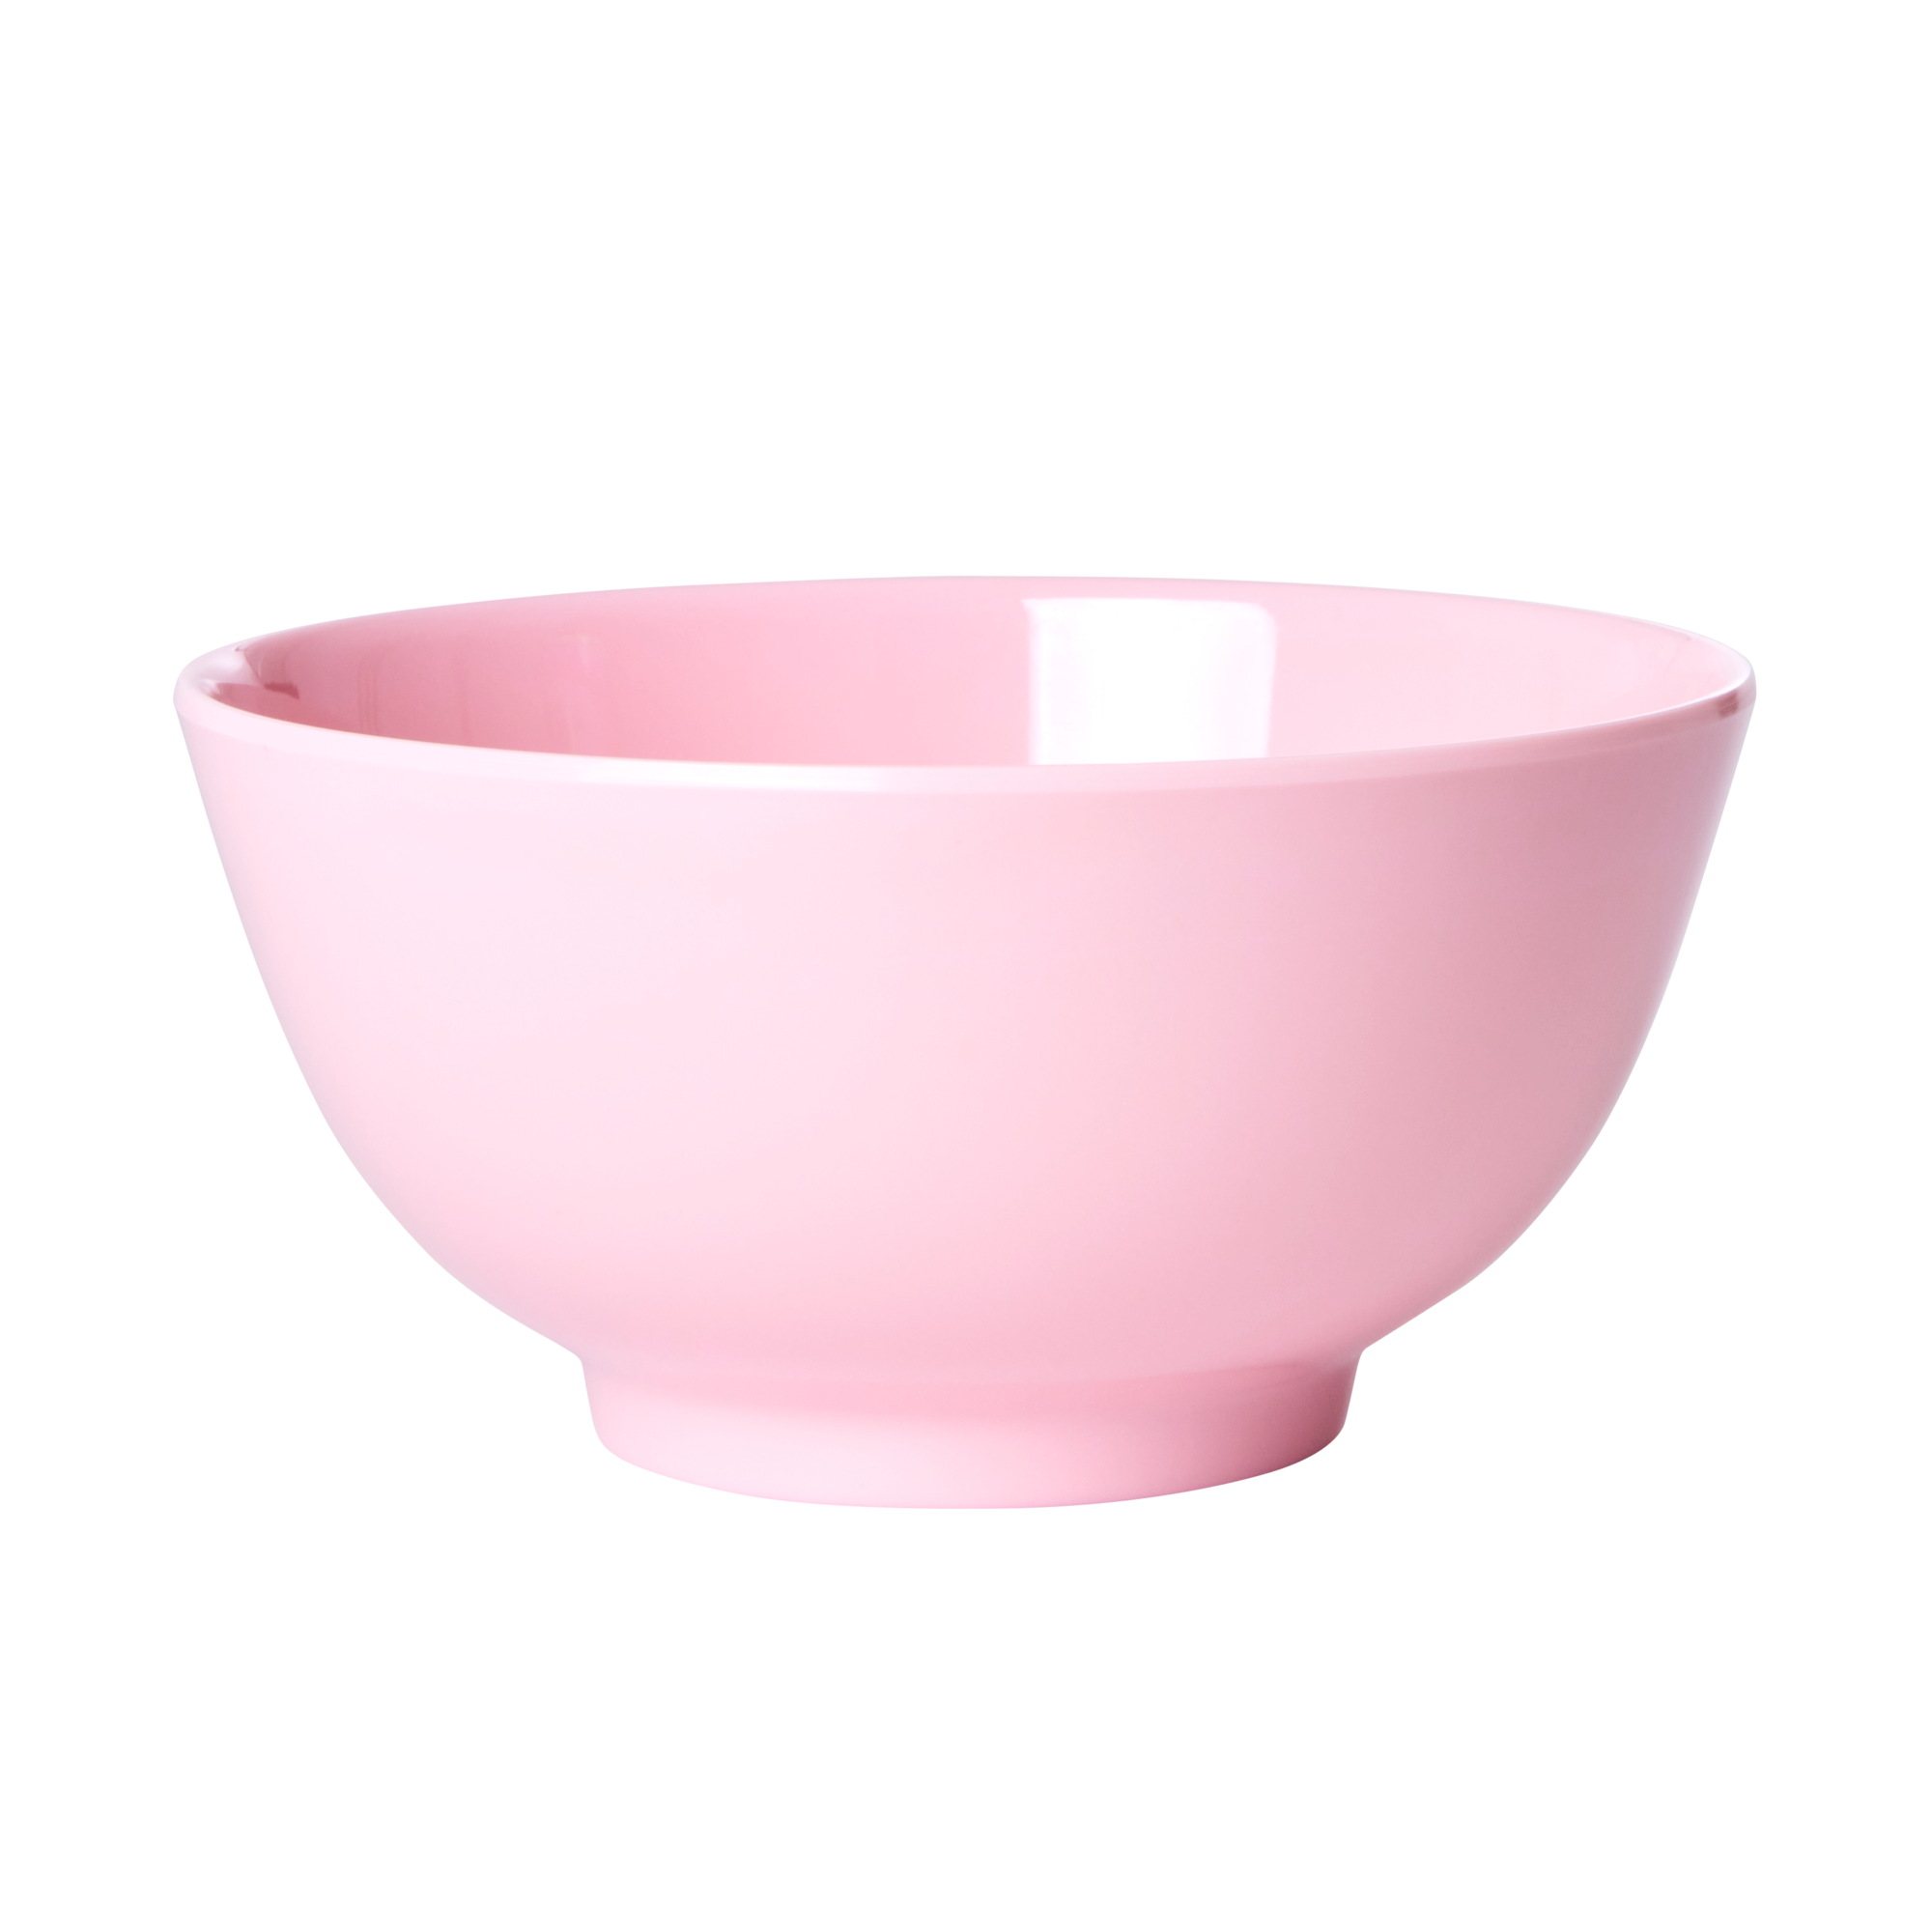 Melamine bowl by Rice by Rice in the color rose